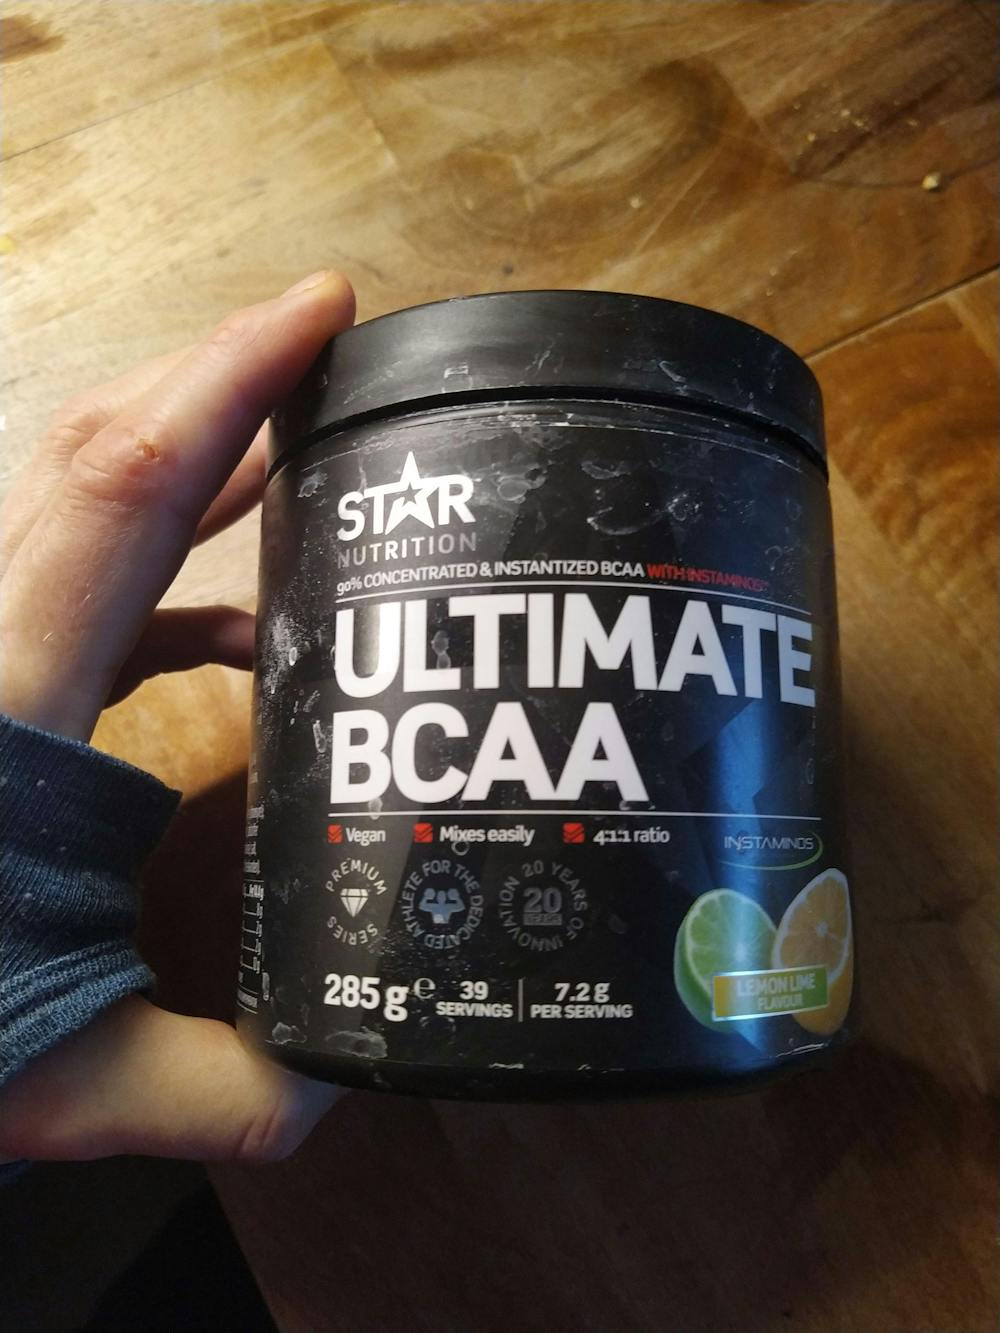 Ultimate BCAA, Star nutrition